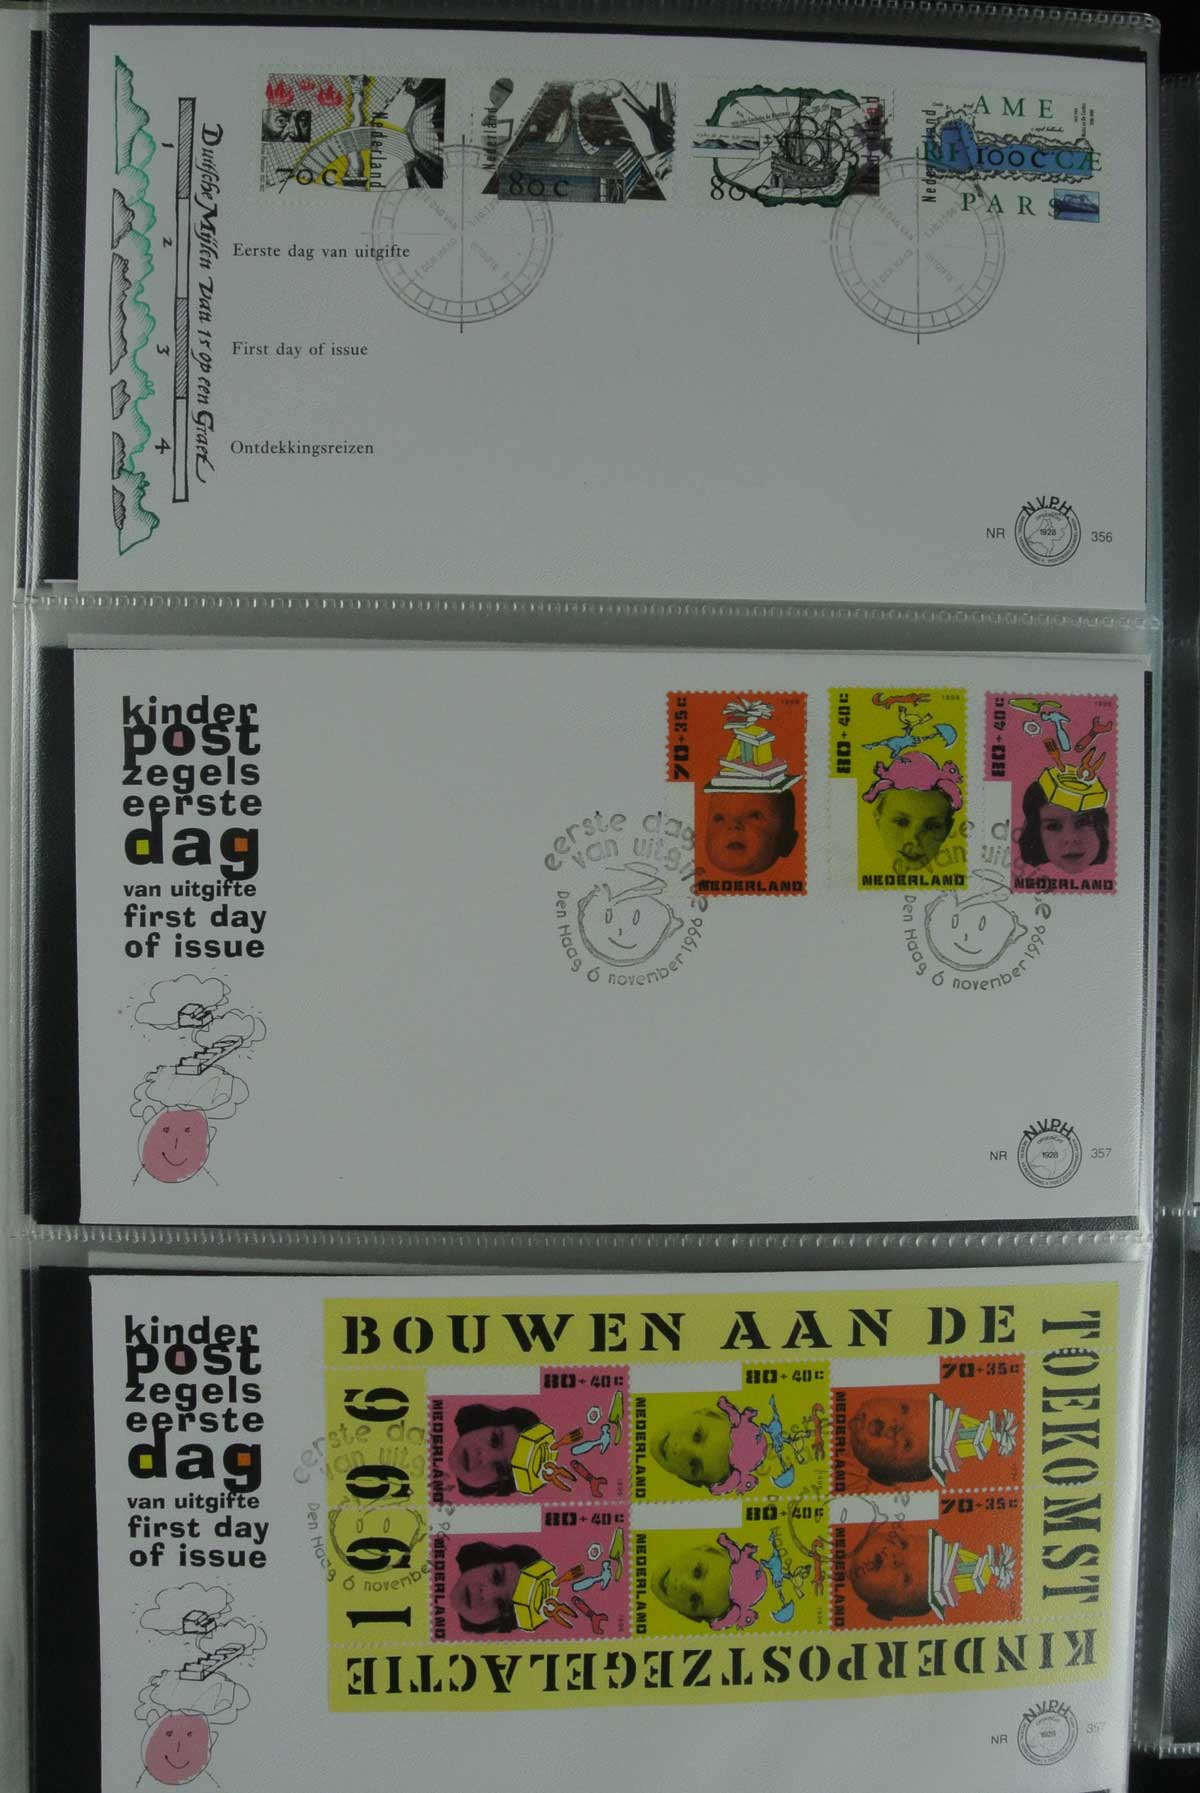 26836 006 - 26836 Netherlands FDC's 1995-2012.